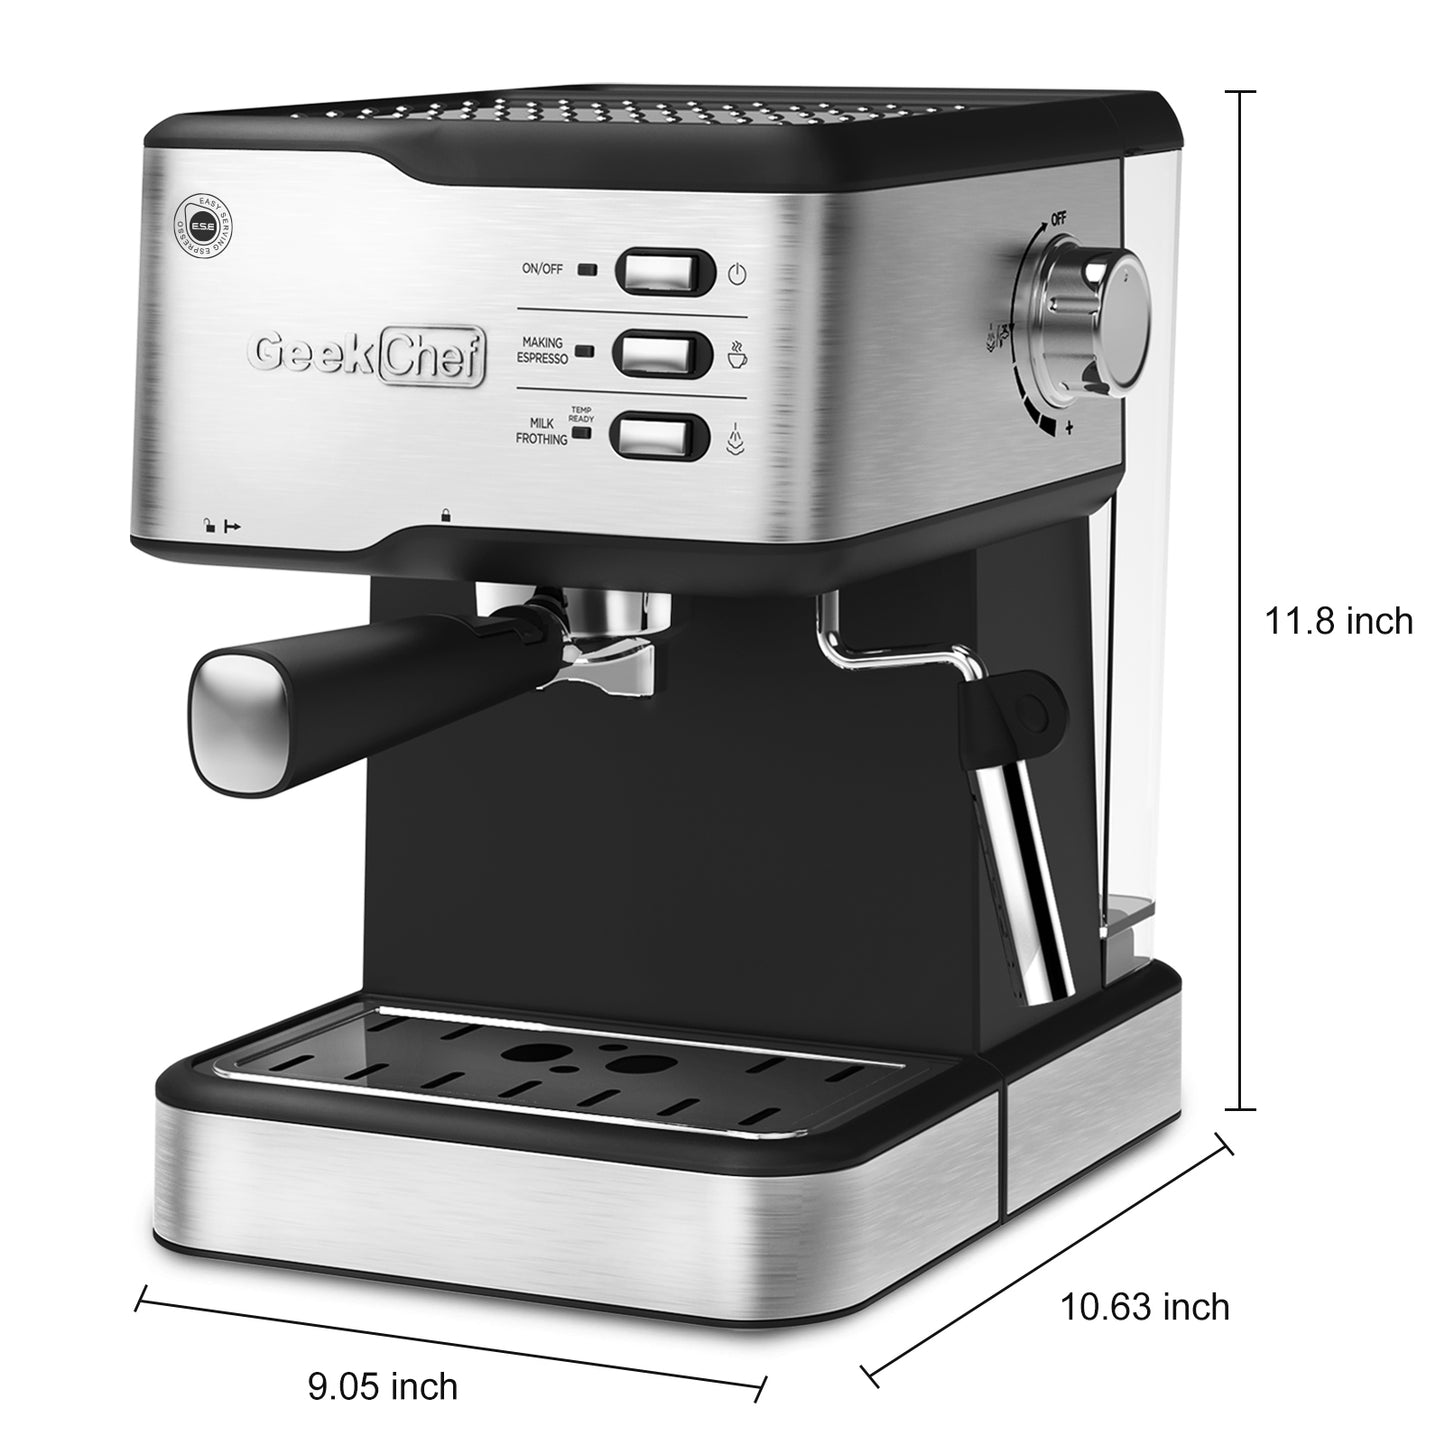 Geek Chef Espresso Machine, Espresso and Cappuccino latte Maker 20 Bar Pump Coffee Machine Compatible with ESE POD capsules filter&Milk Frother Steam Wand,950W,1.5L Water Tank Ban on Amazon